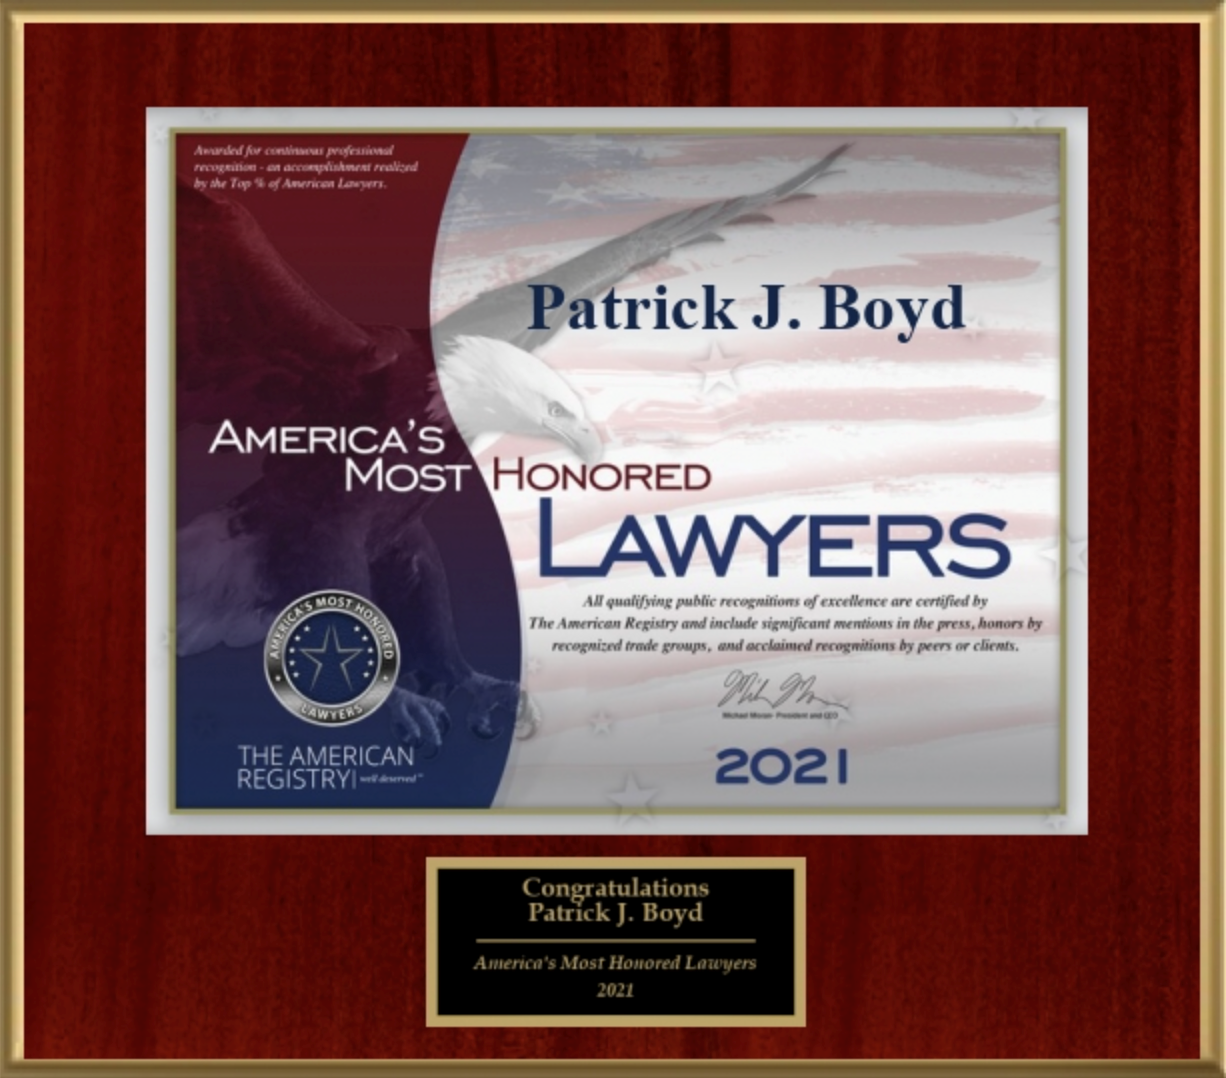 Award - Patrick J. Boyd: America's Most Honored Lawyers 2021